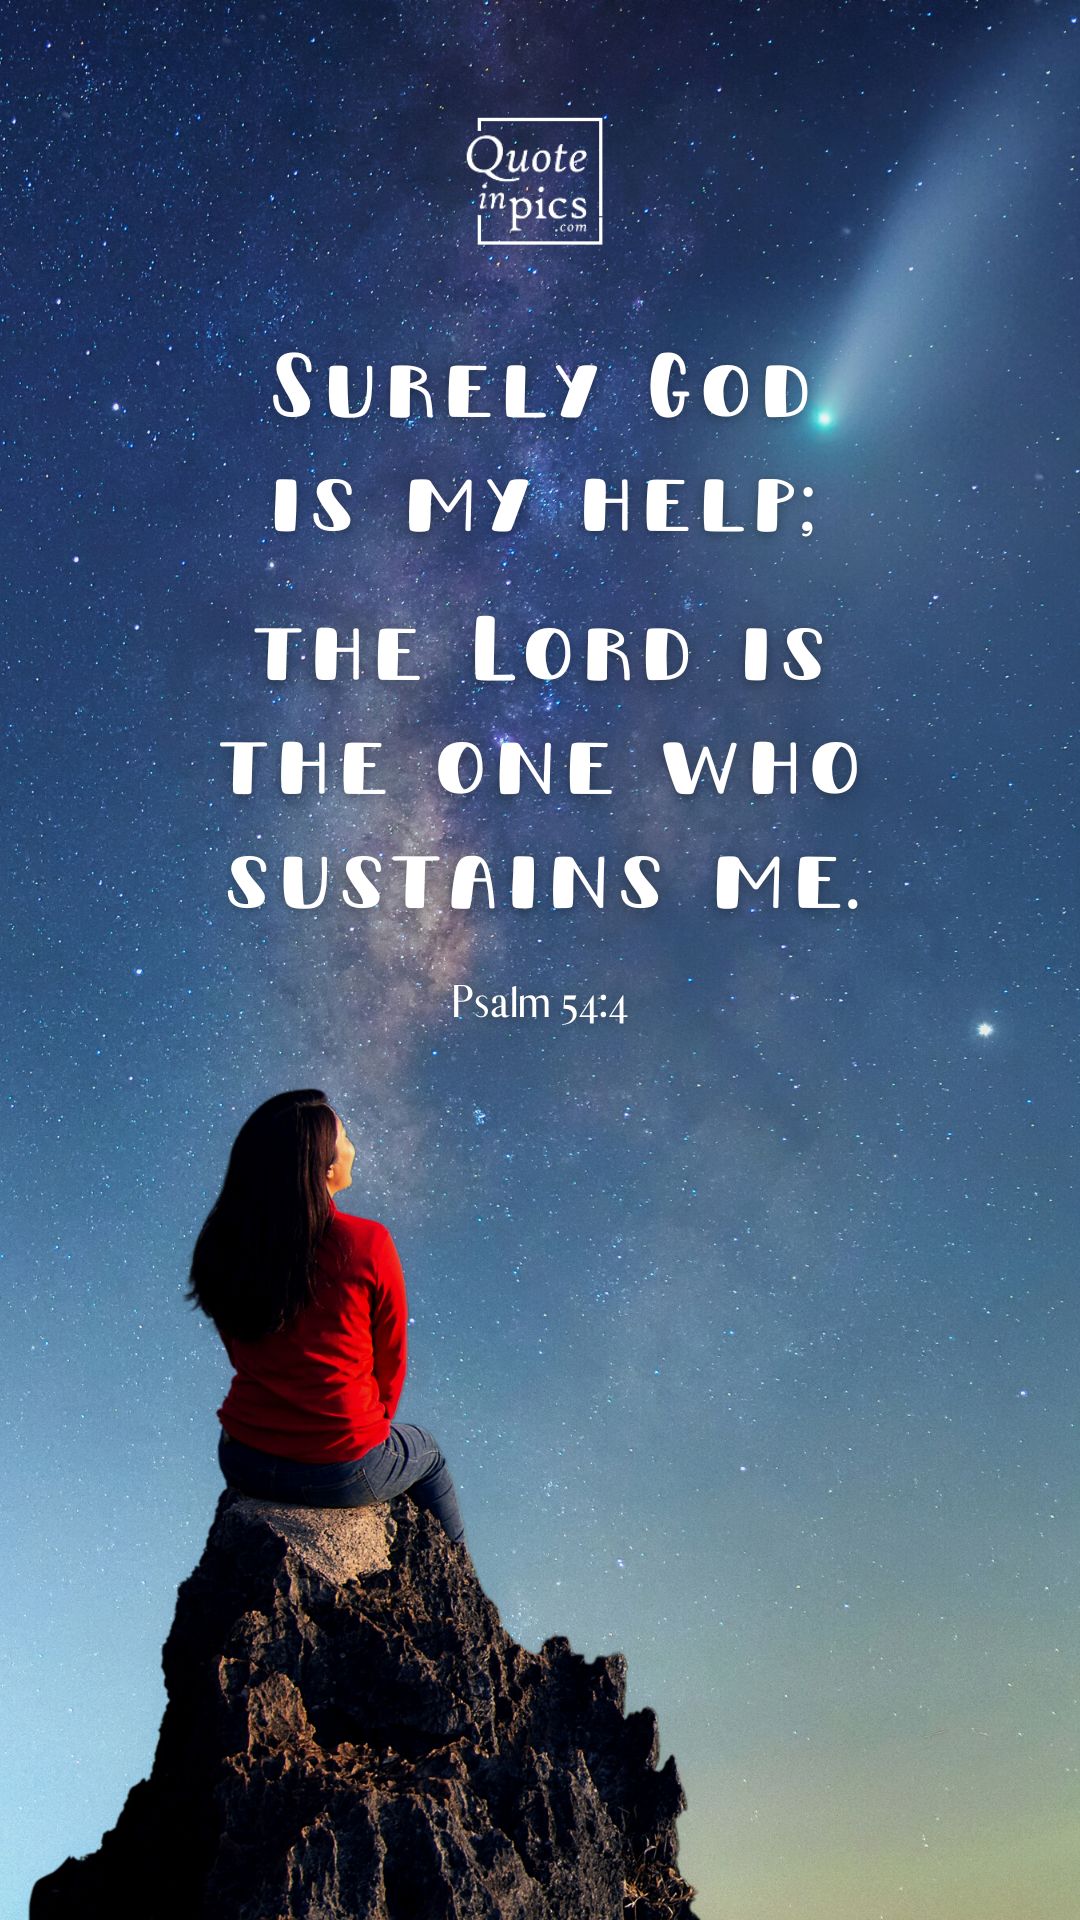 Surely God is my help; the Lord is the one who sustains me - Psalm 54:4